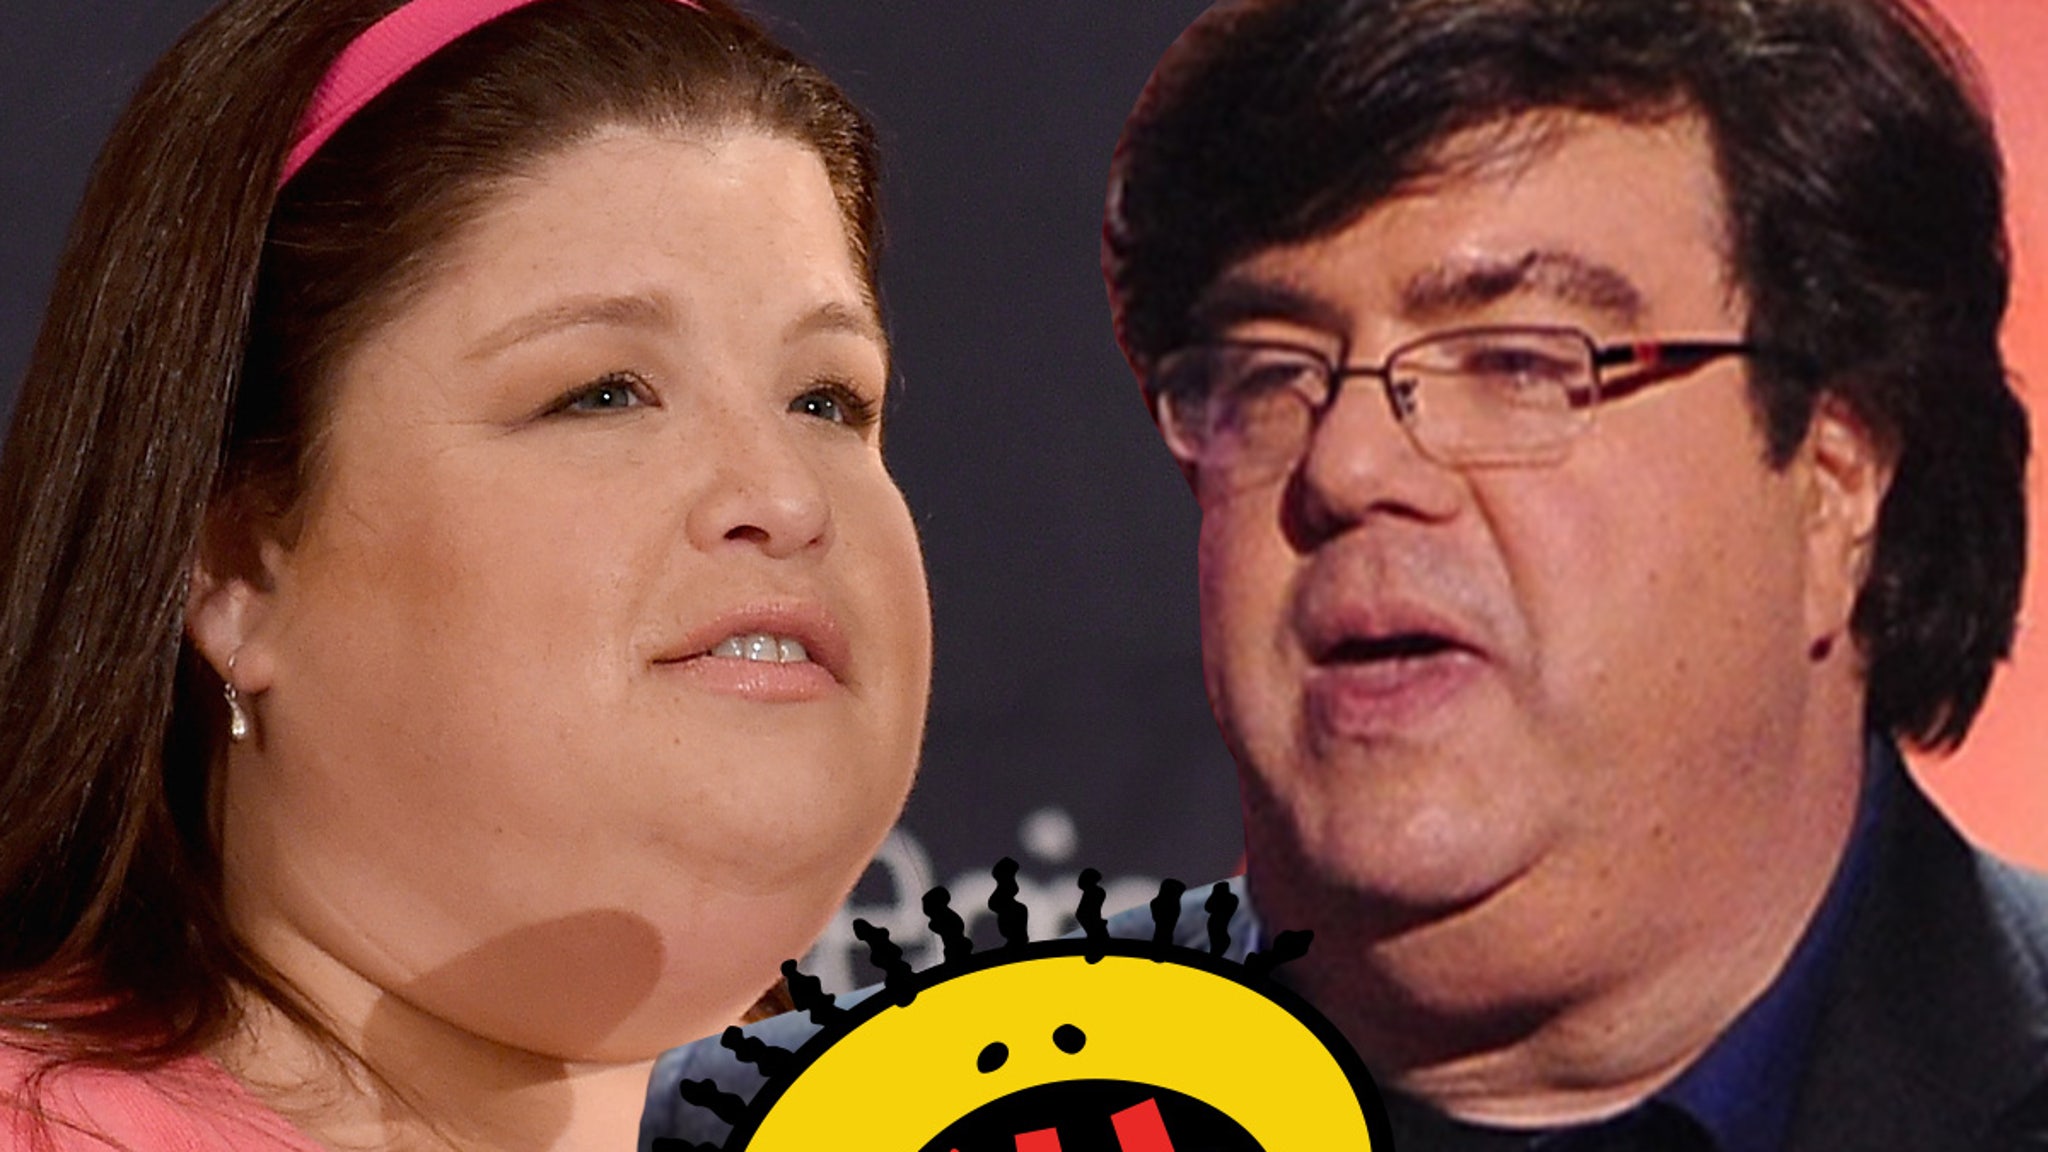 'All That' Star Lori Beth Denberg Accuses Dan Schneider Of Sexual Misconduct